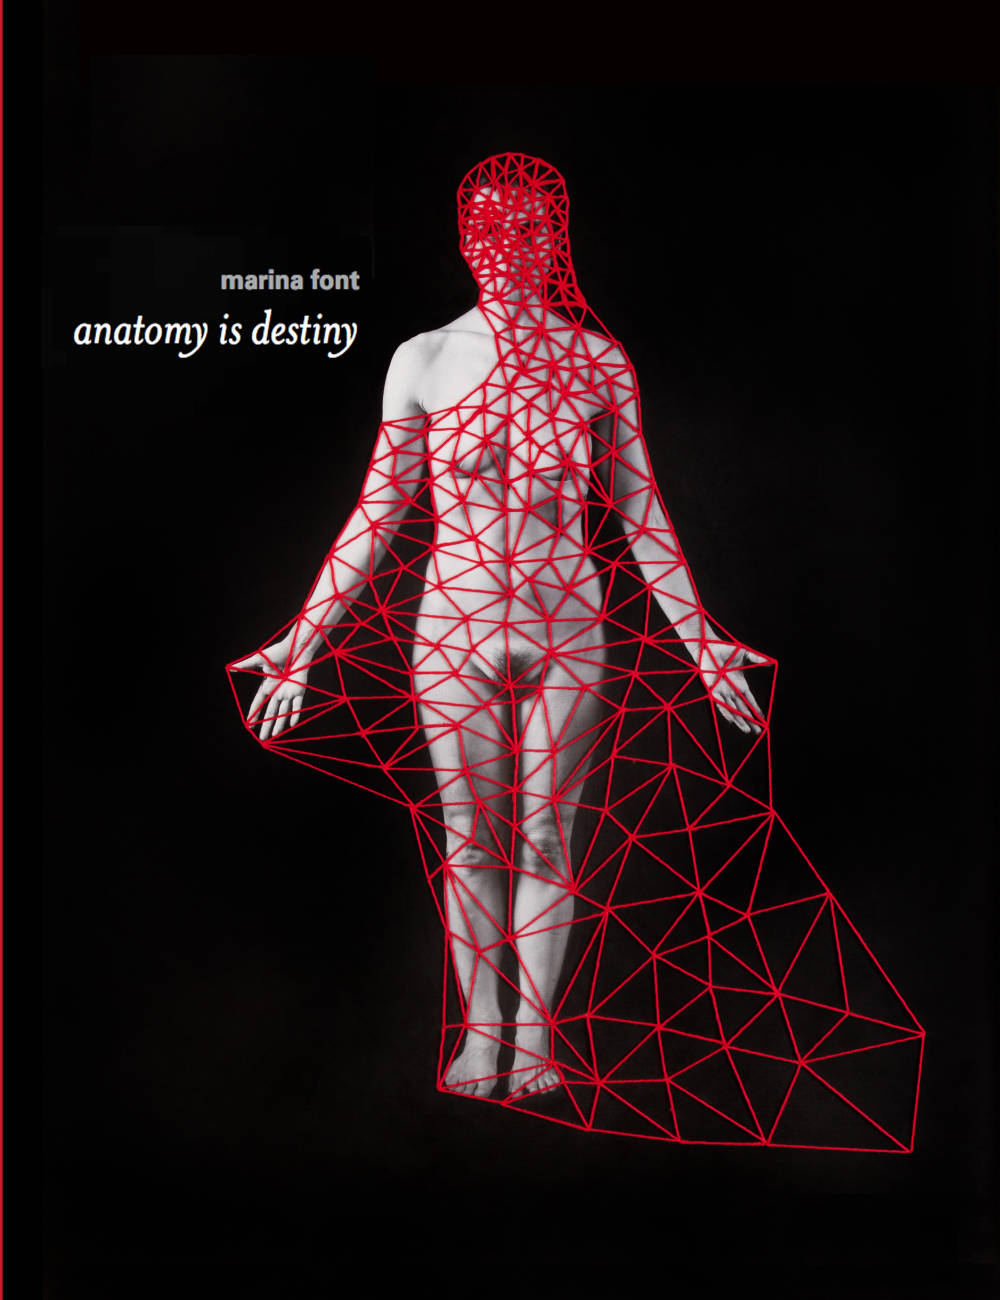 Marina Font's book, 'Anatomy is Destiny' is available for presale through Minor Matters Books (2017).